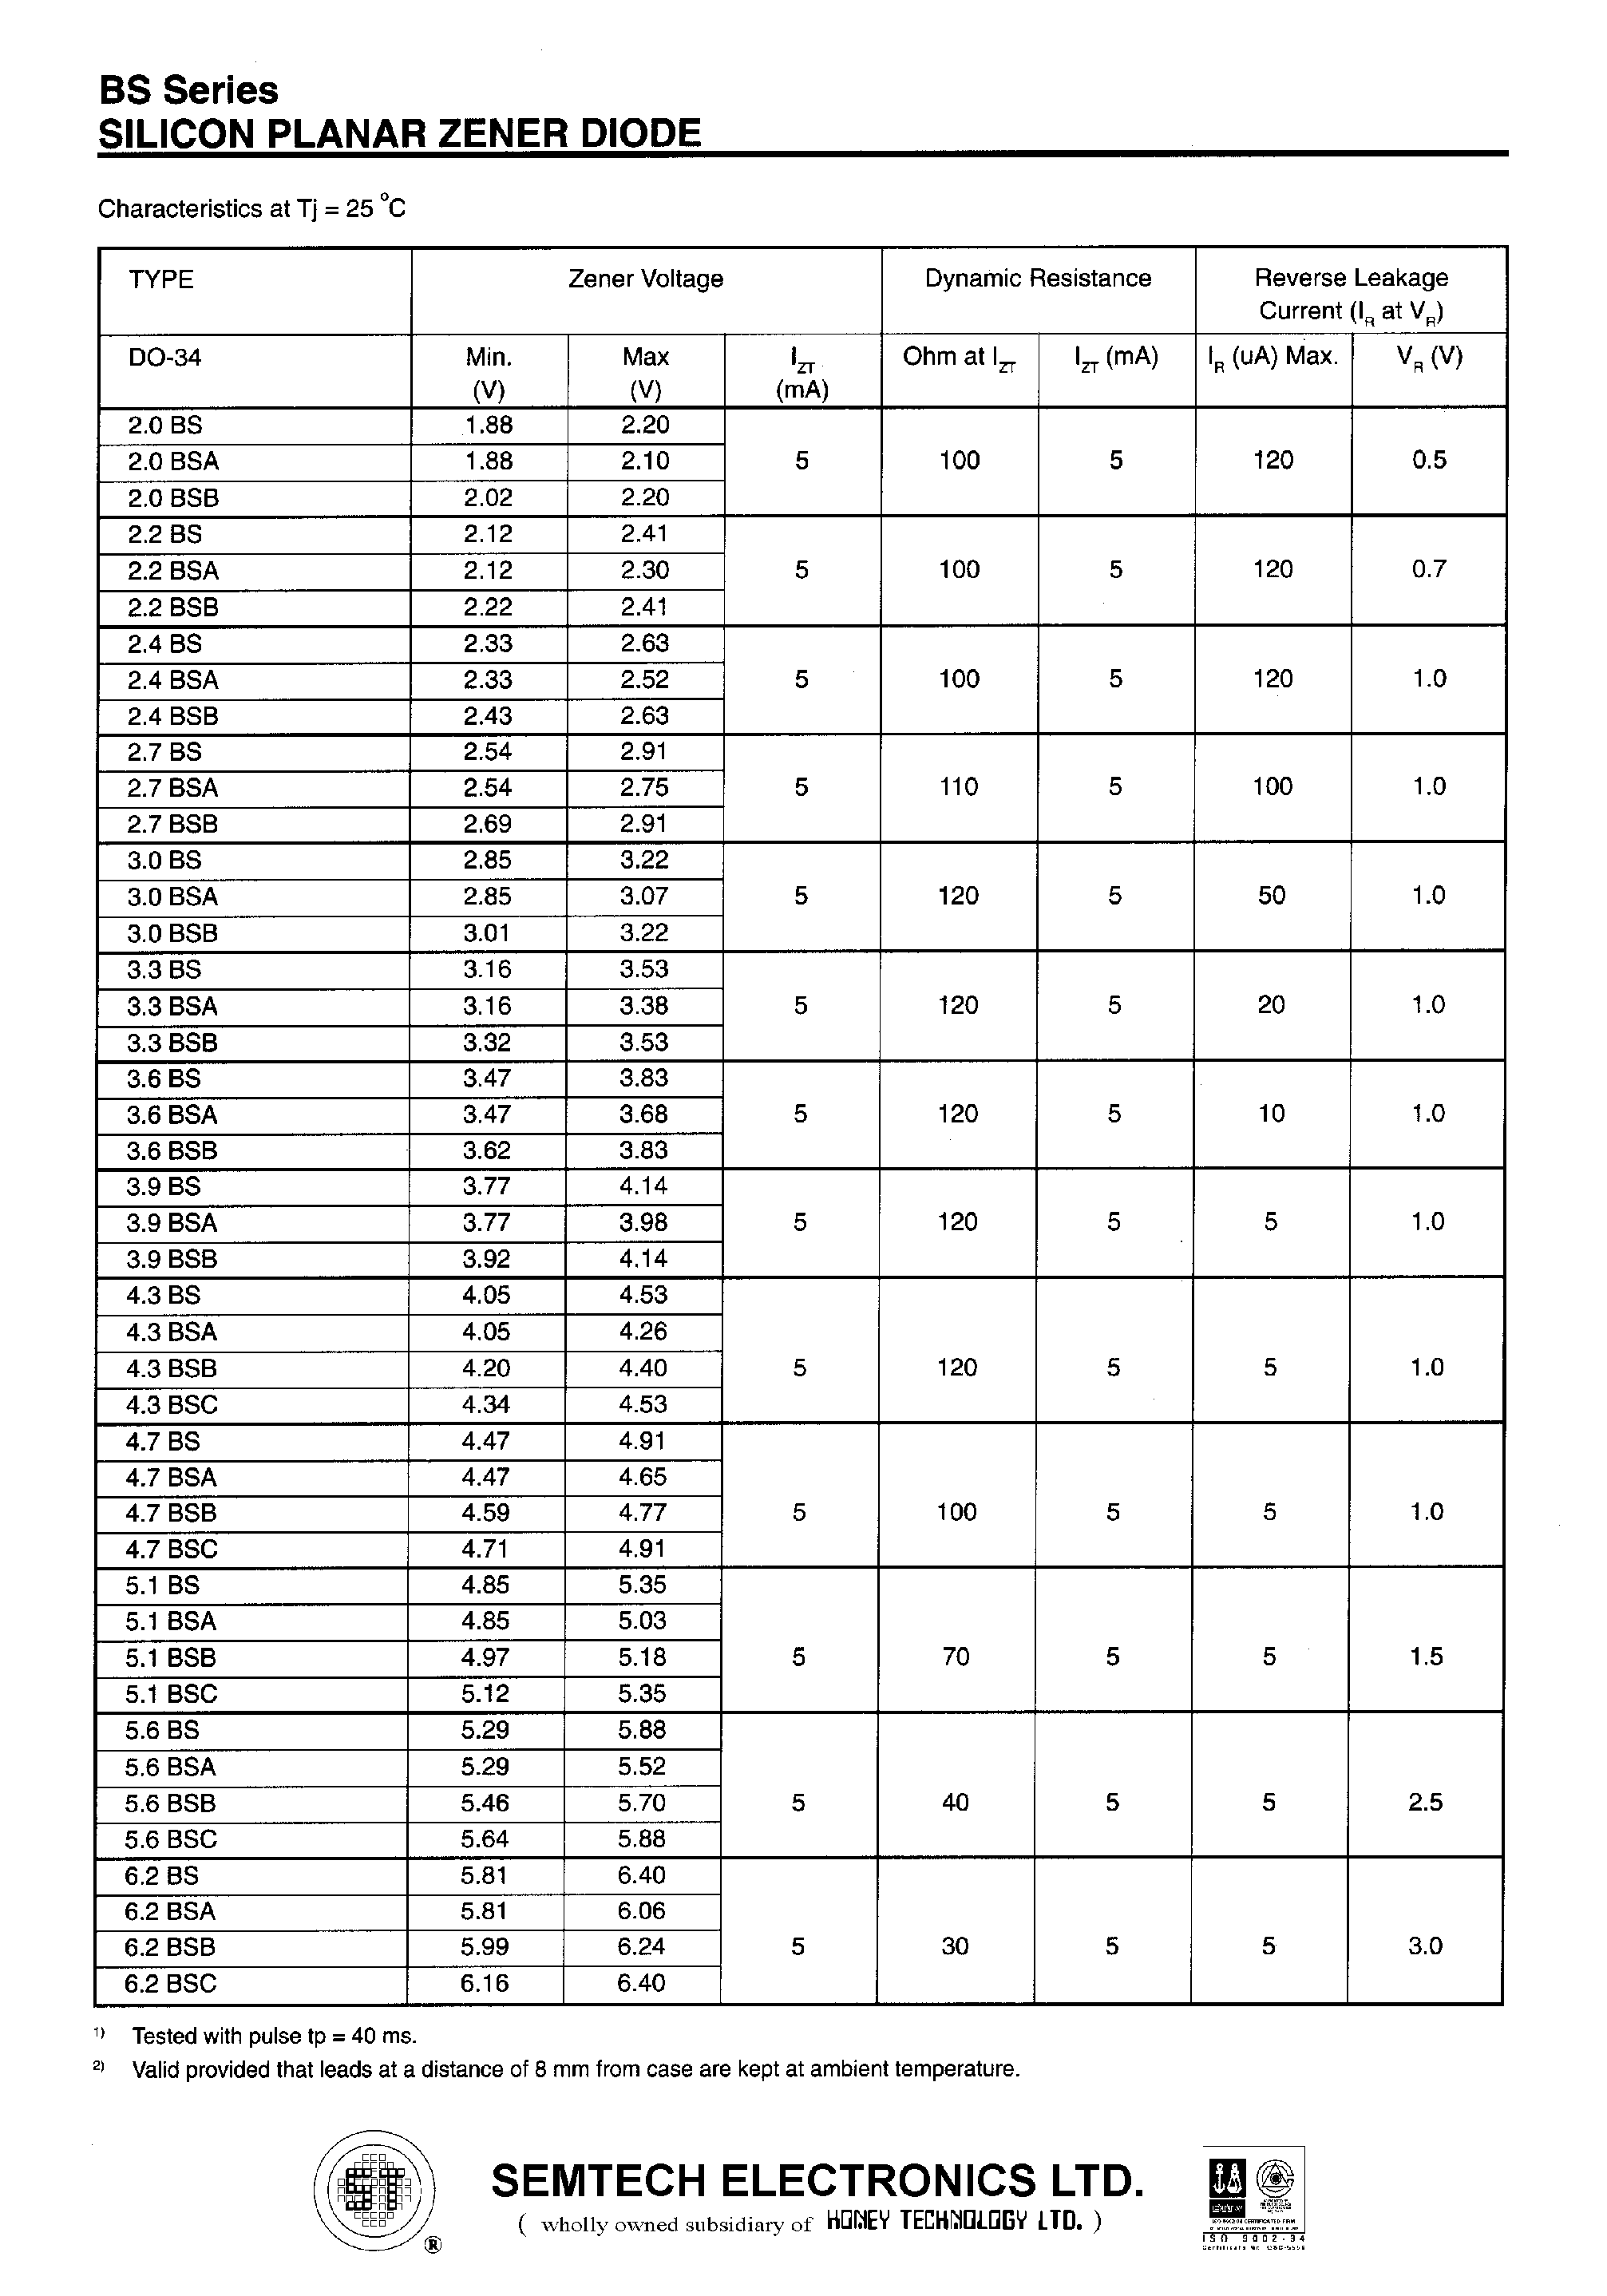 Datasheet 6.8BS - SILICON PLANAR ZENER DIODE page 2